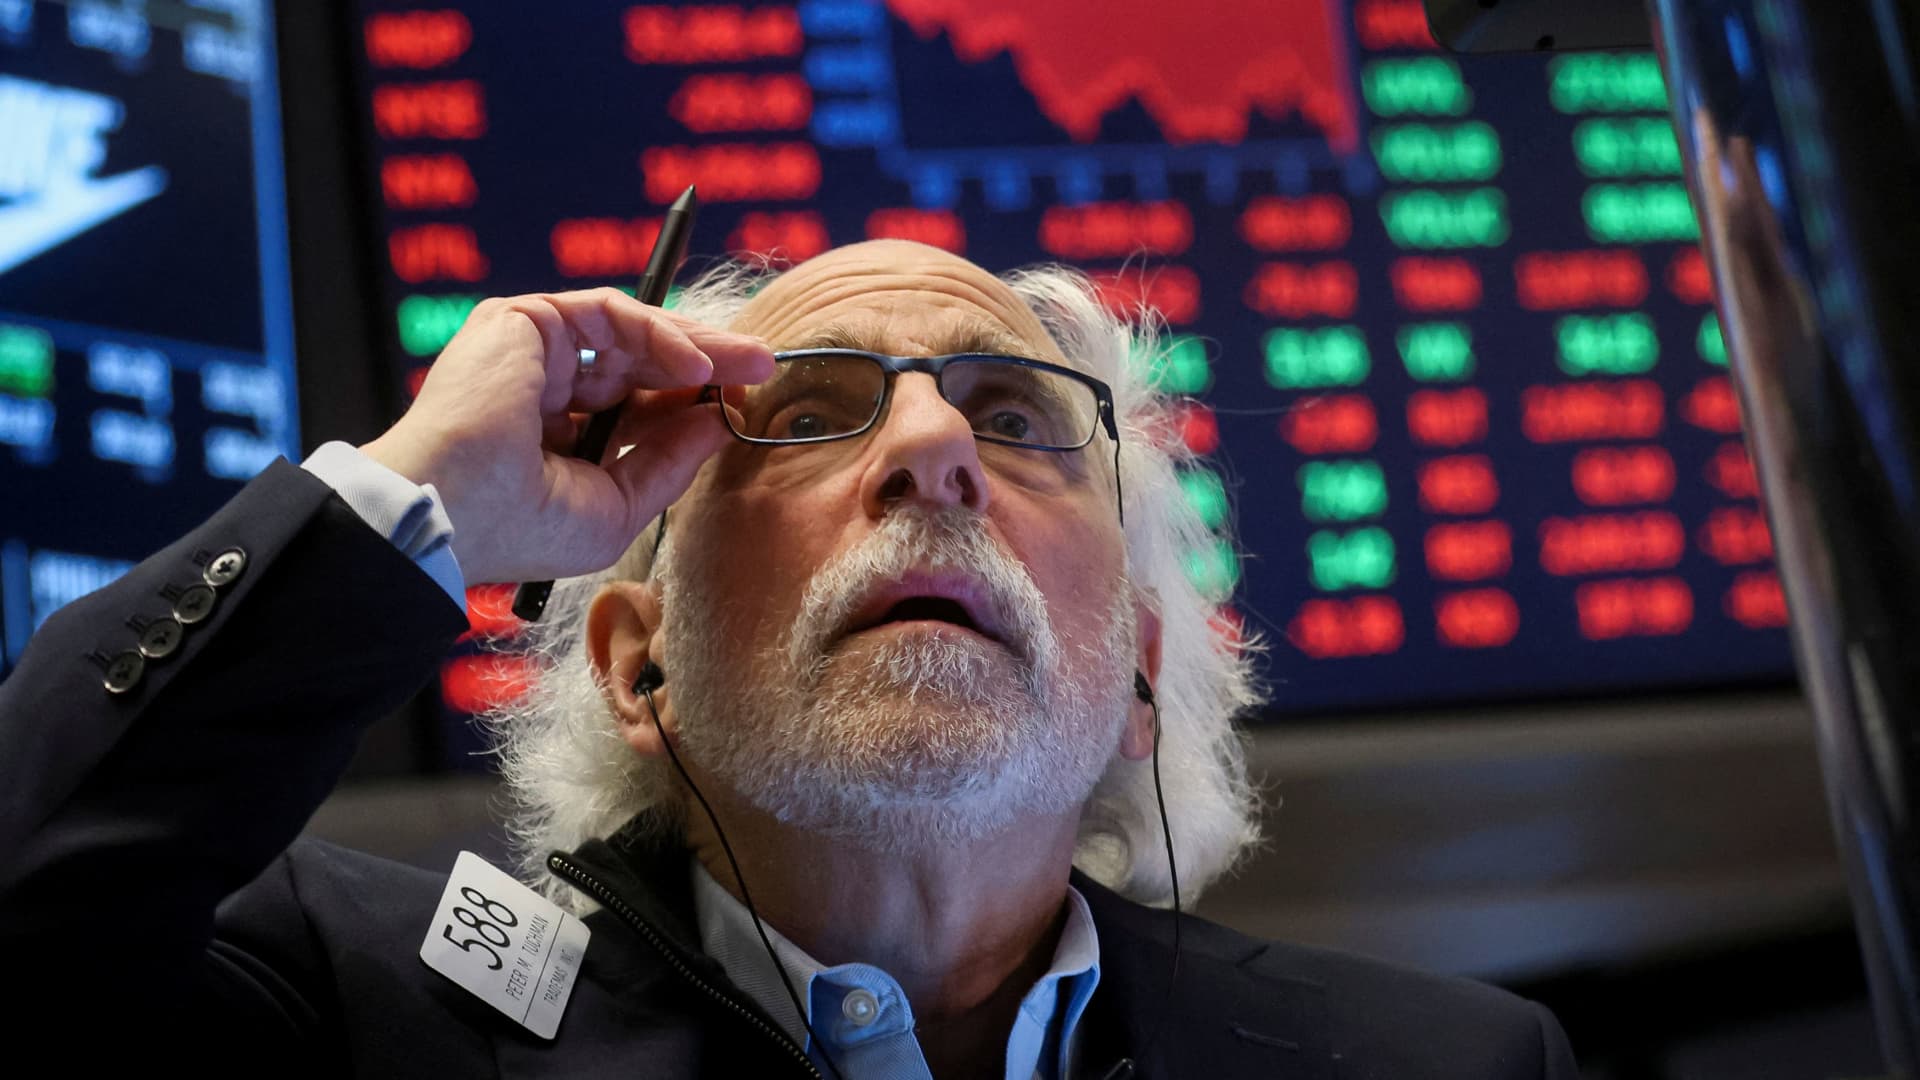 Trader Peter Tuchman works on the floor of the New York Stock Exchange (NYSE) in New York City, U.S., March 1, 2022.